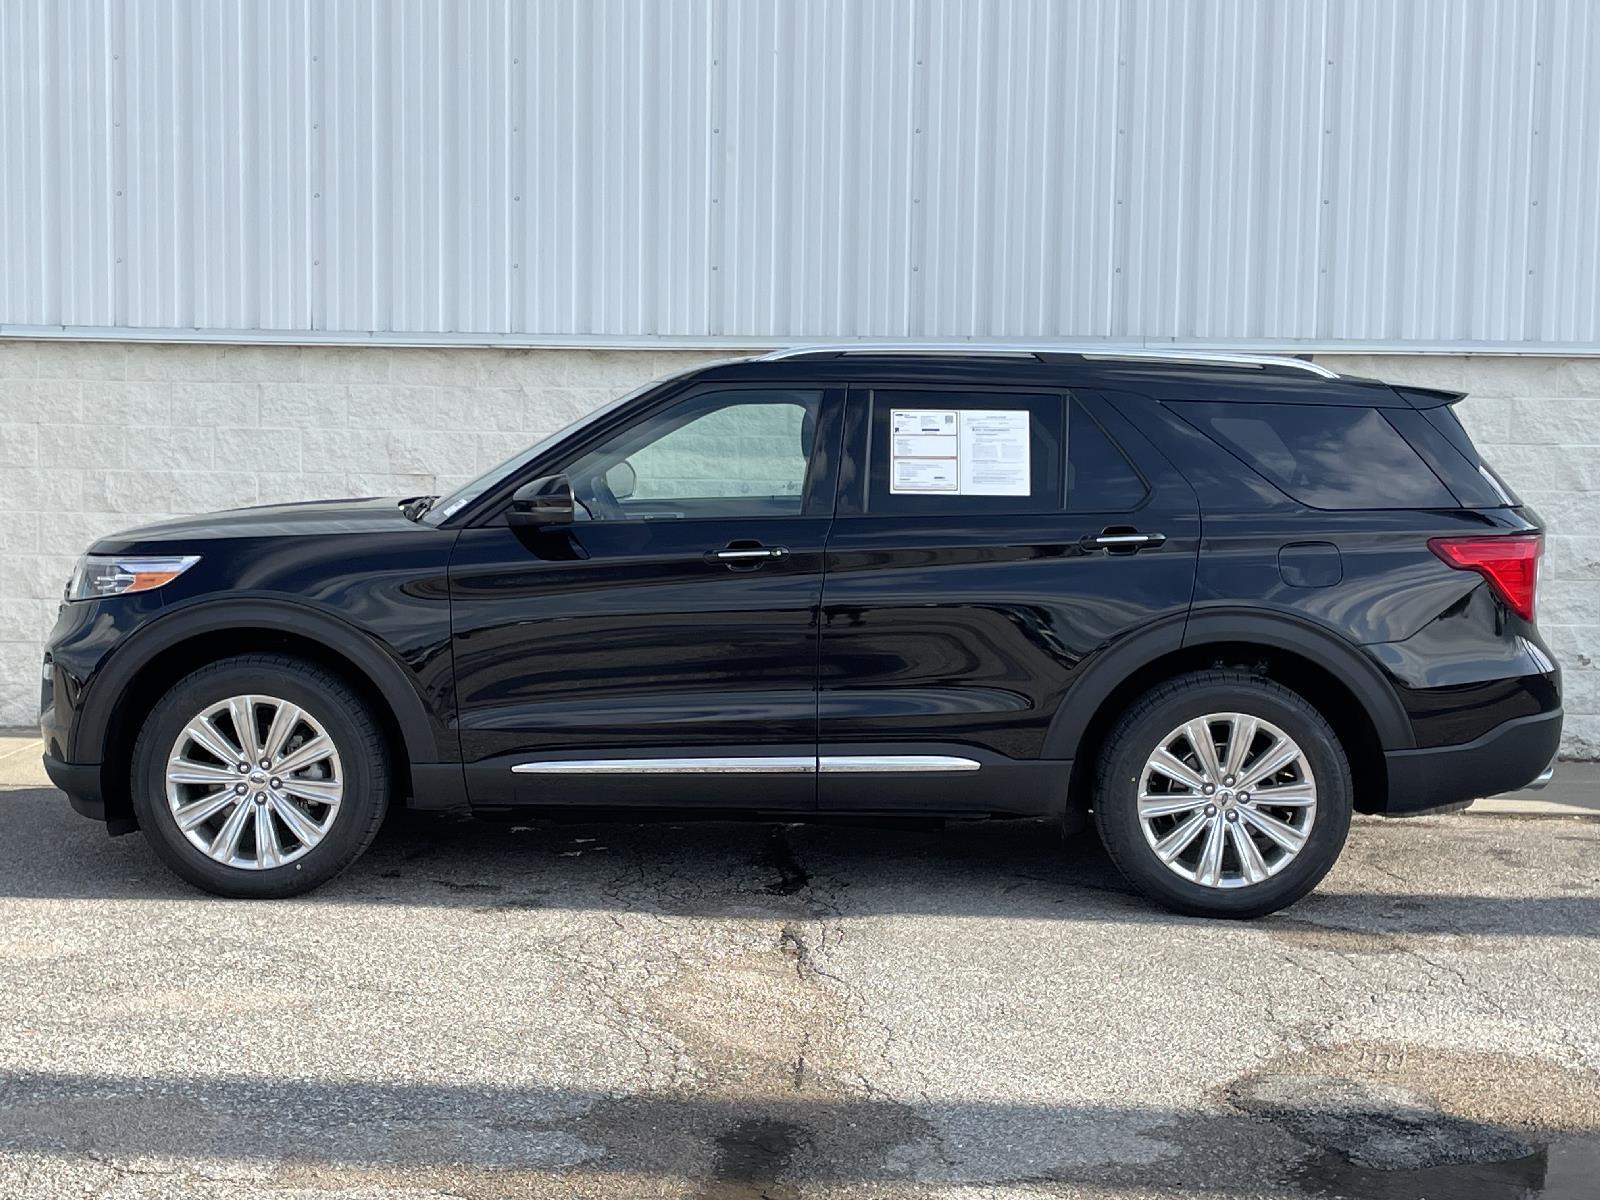 Used 2021 Ford Explorer Limited SUV for sale in Lincoln NE